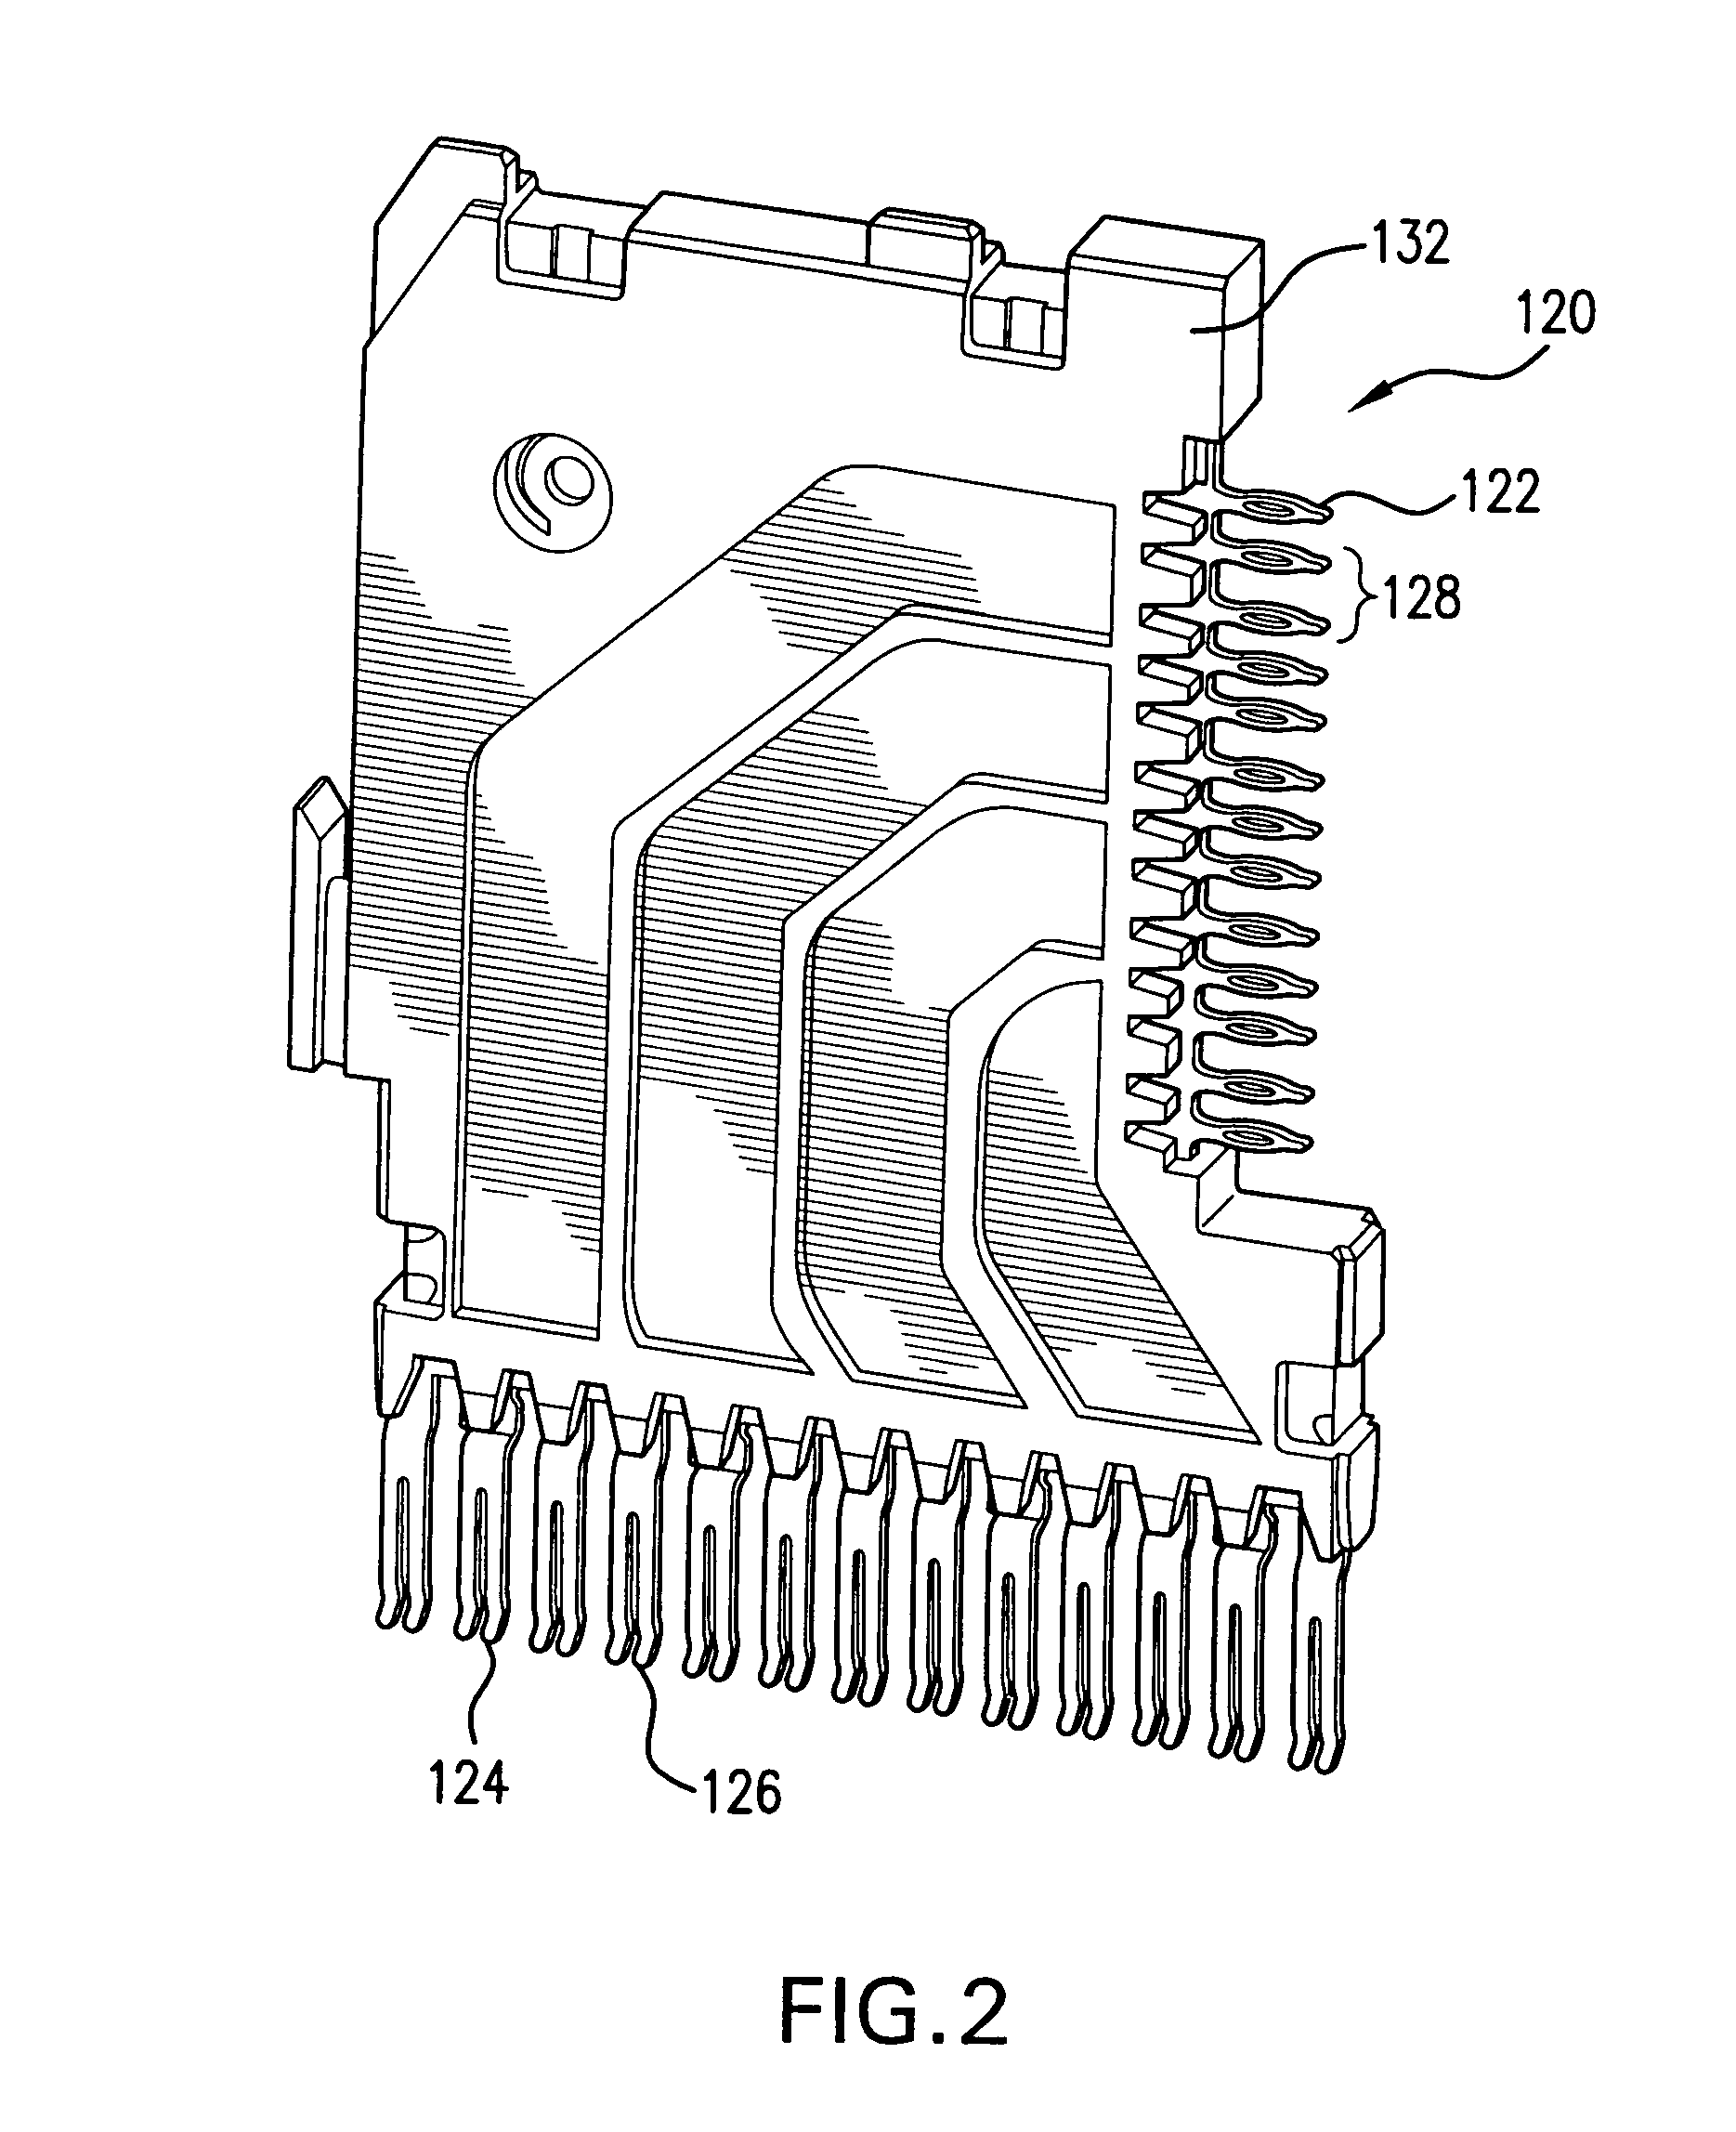 High speed high density electrical connector